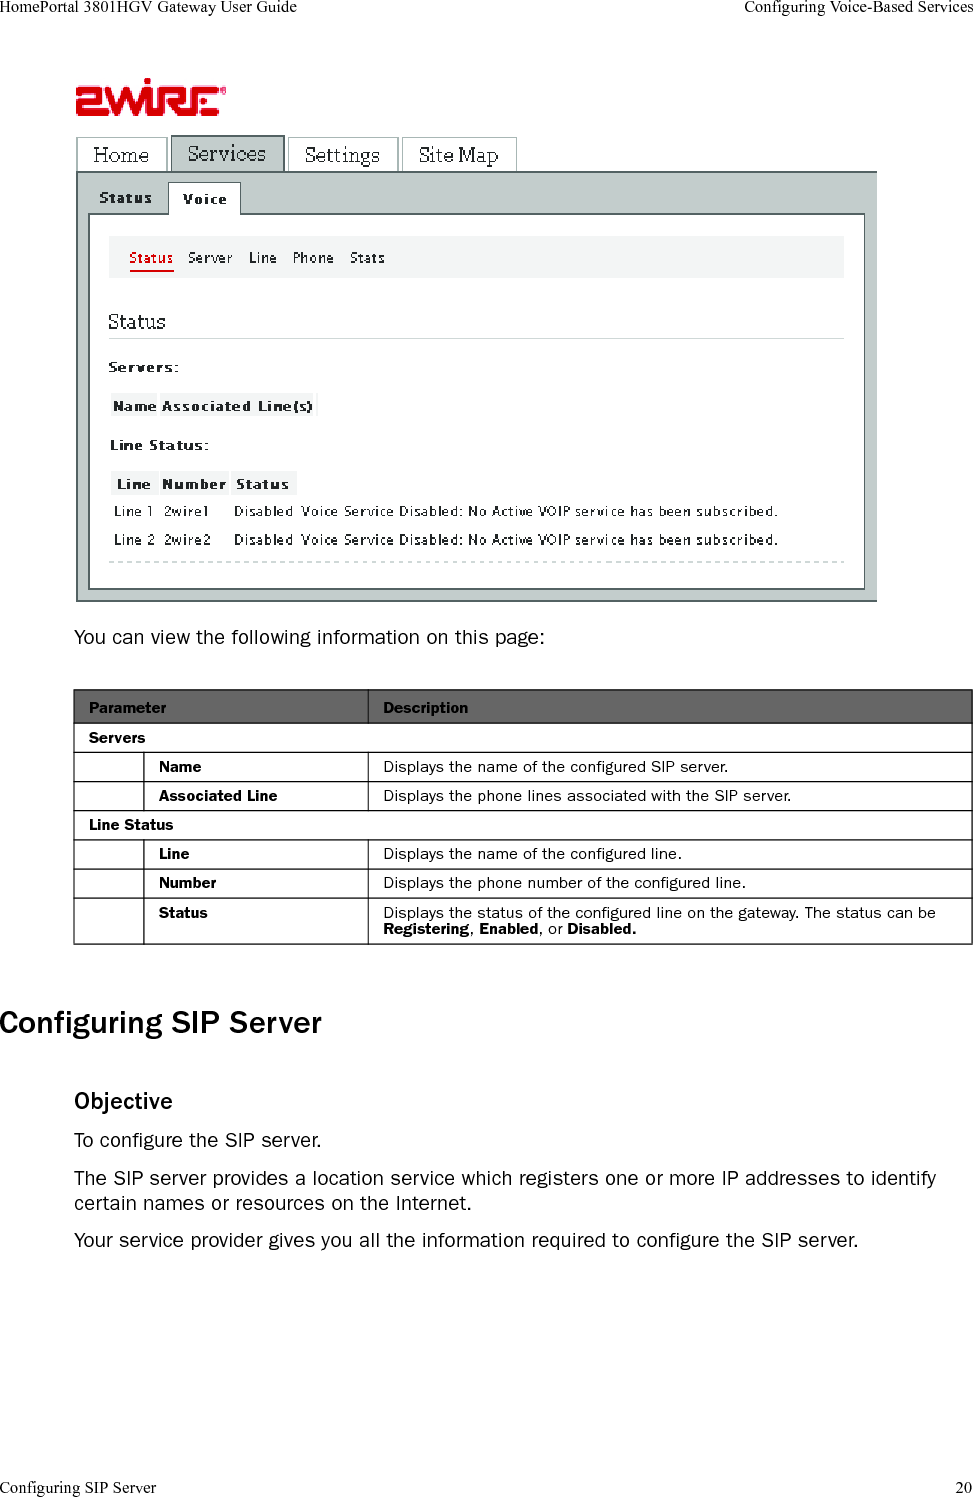 Configuring SIP Server 20HomePortal 3801HGV Gateway User Guide Configuring Voice-Based ServicesYou can view the following information on this page:Configuring SIP ServerObjectiveTo configure the SIP server.The SIP server provides a location service which registers one or more IP addresses to identify certain names or resources on the Internet.Your service provider gives you all the information required to configure the SIP server.Parameter DescriptionServersName Displays the name of the configured SIP server.Associated Line Displays the phone lines associated with the SIP server.Line StatusLine Displays the name of the configured line.Number Displays the phone number of the configured line.Status Displays the status of the configured line on the gateway. The status can be Registering, Enabled, or Disabled.